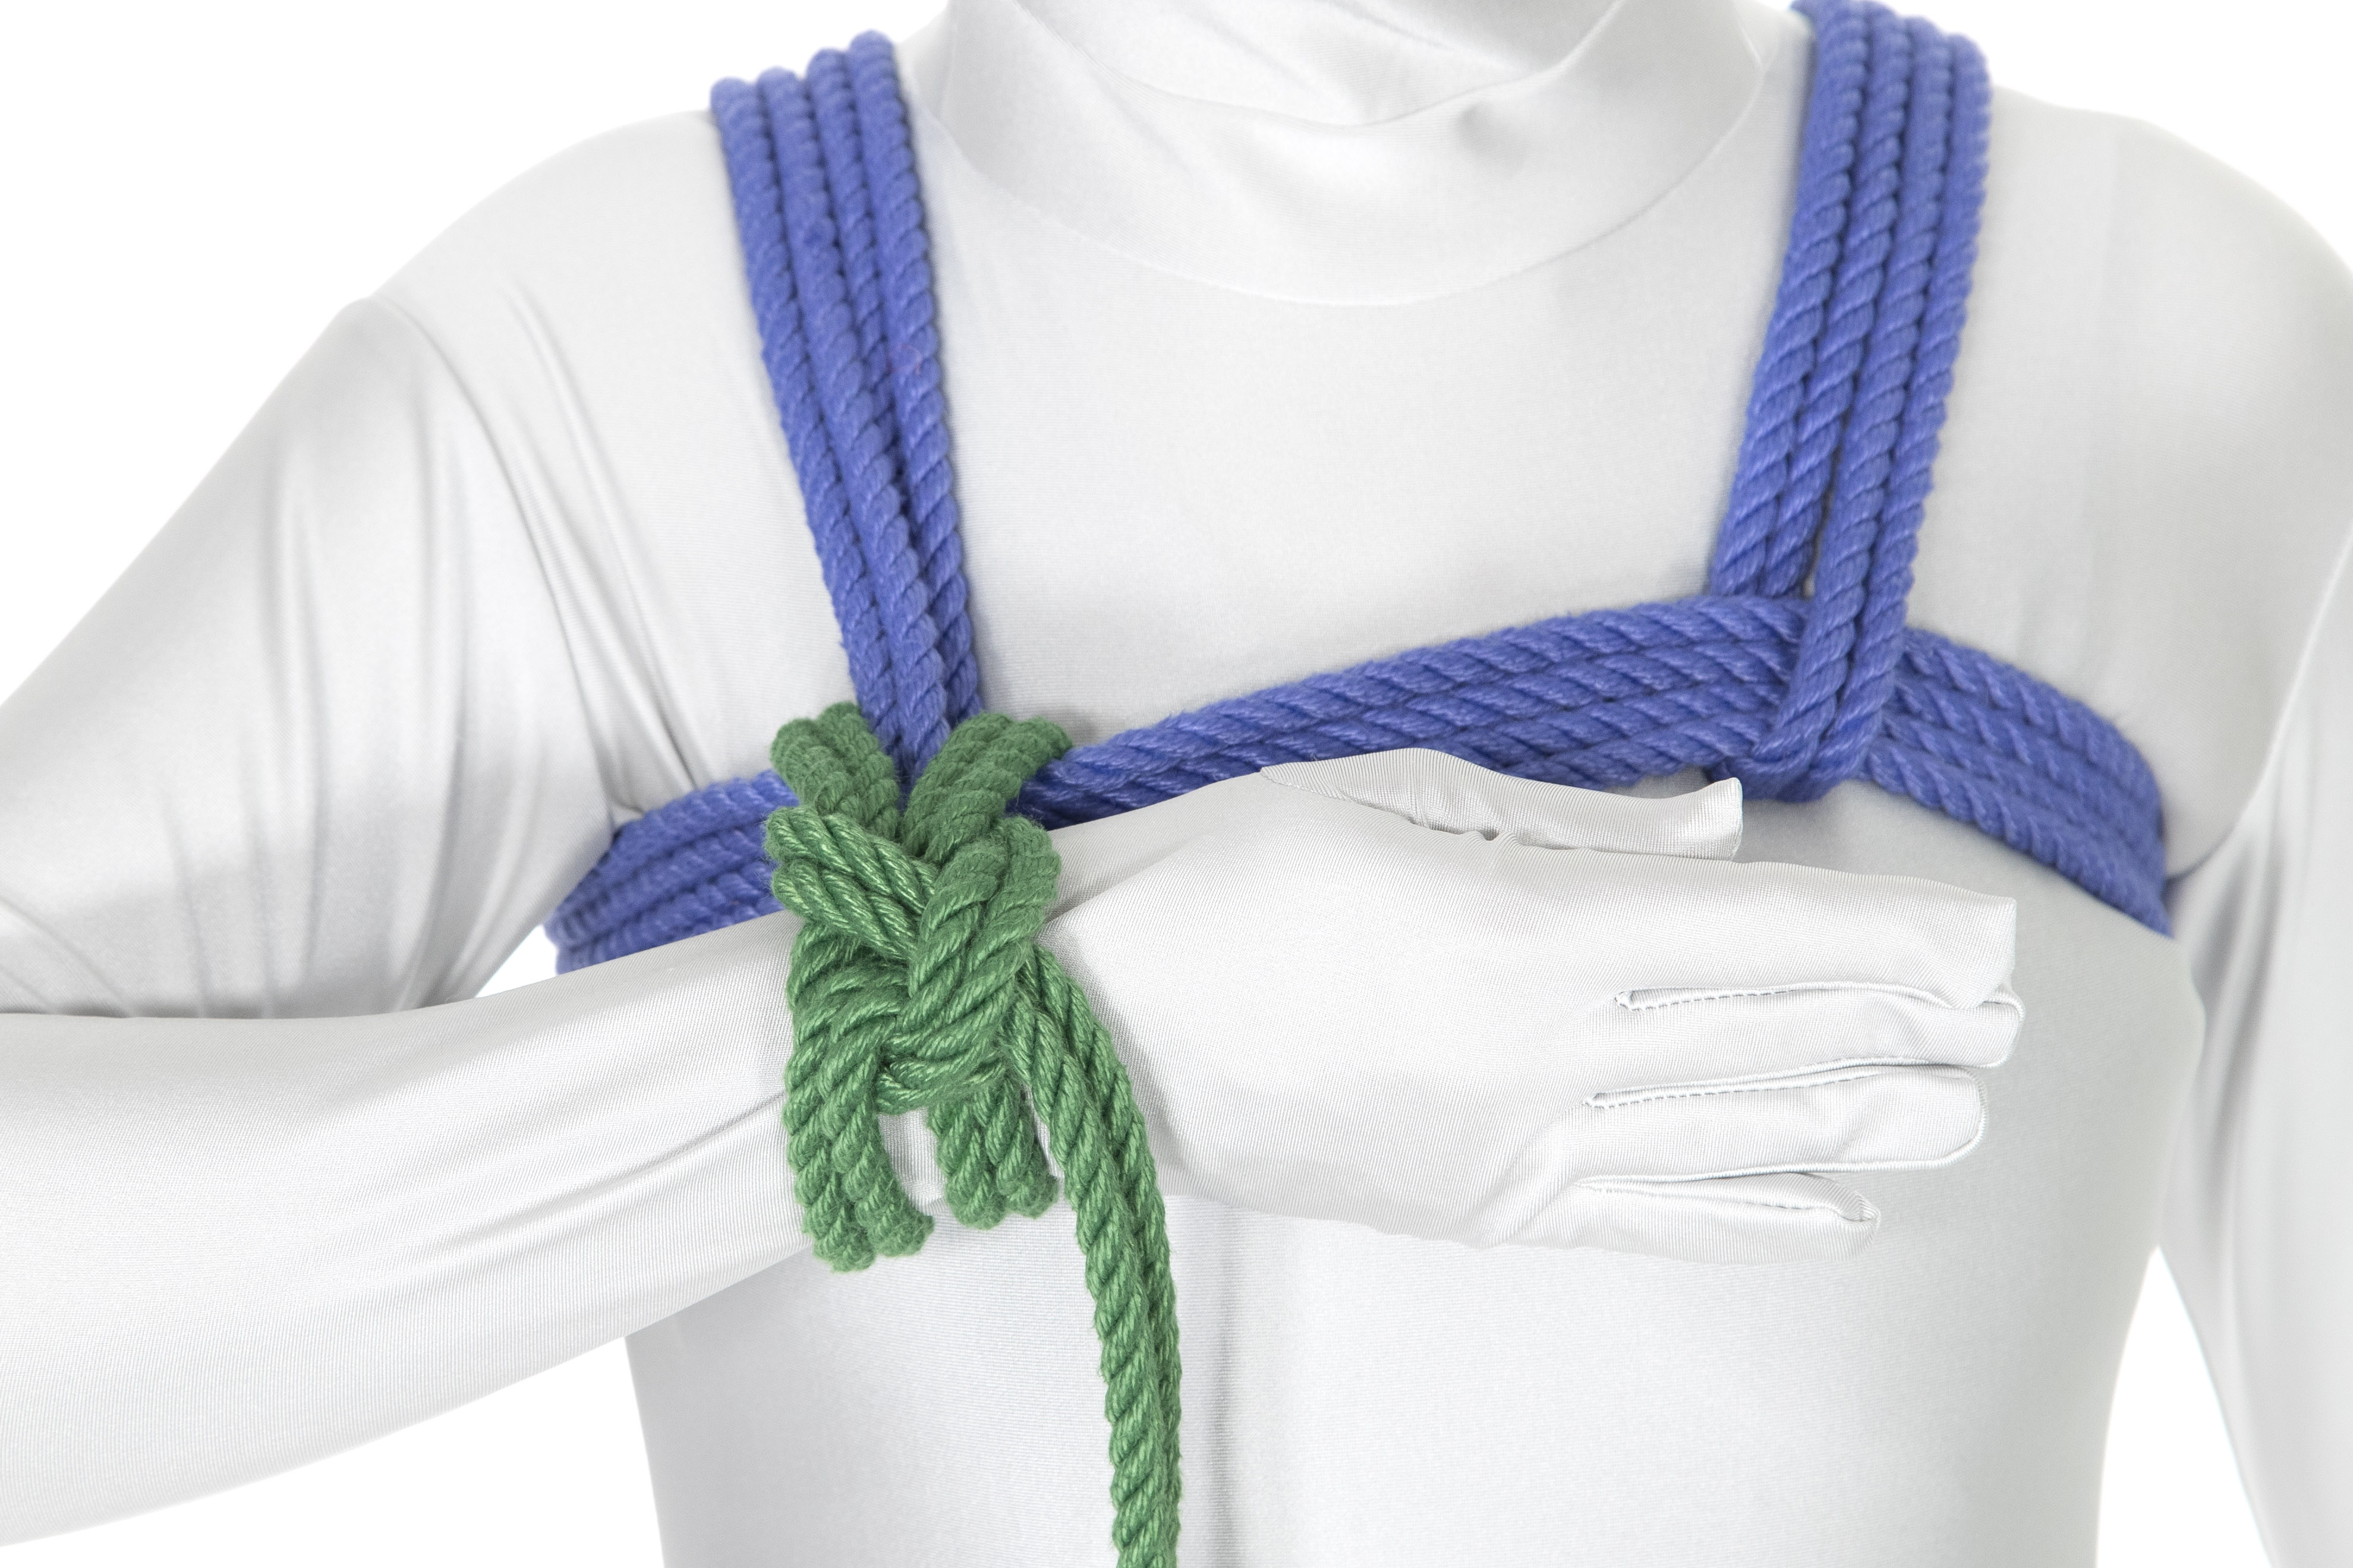 A front view of a person in a white bodysuit wearing a blue chest harness. Their right arm is bent at the elbow. A green column tie binds the right wrist to the chest harness at the point where the right shoulder line connects to the front chest wraps.